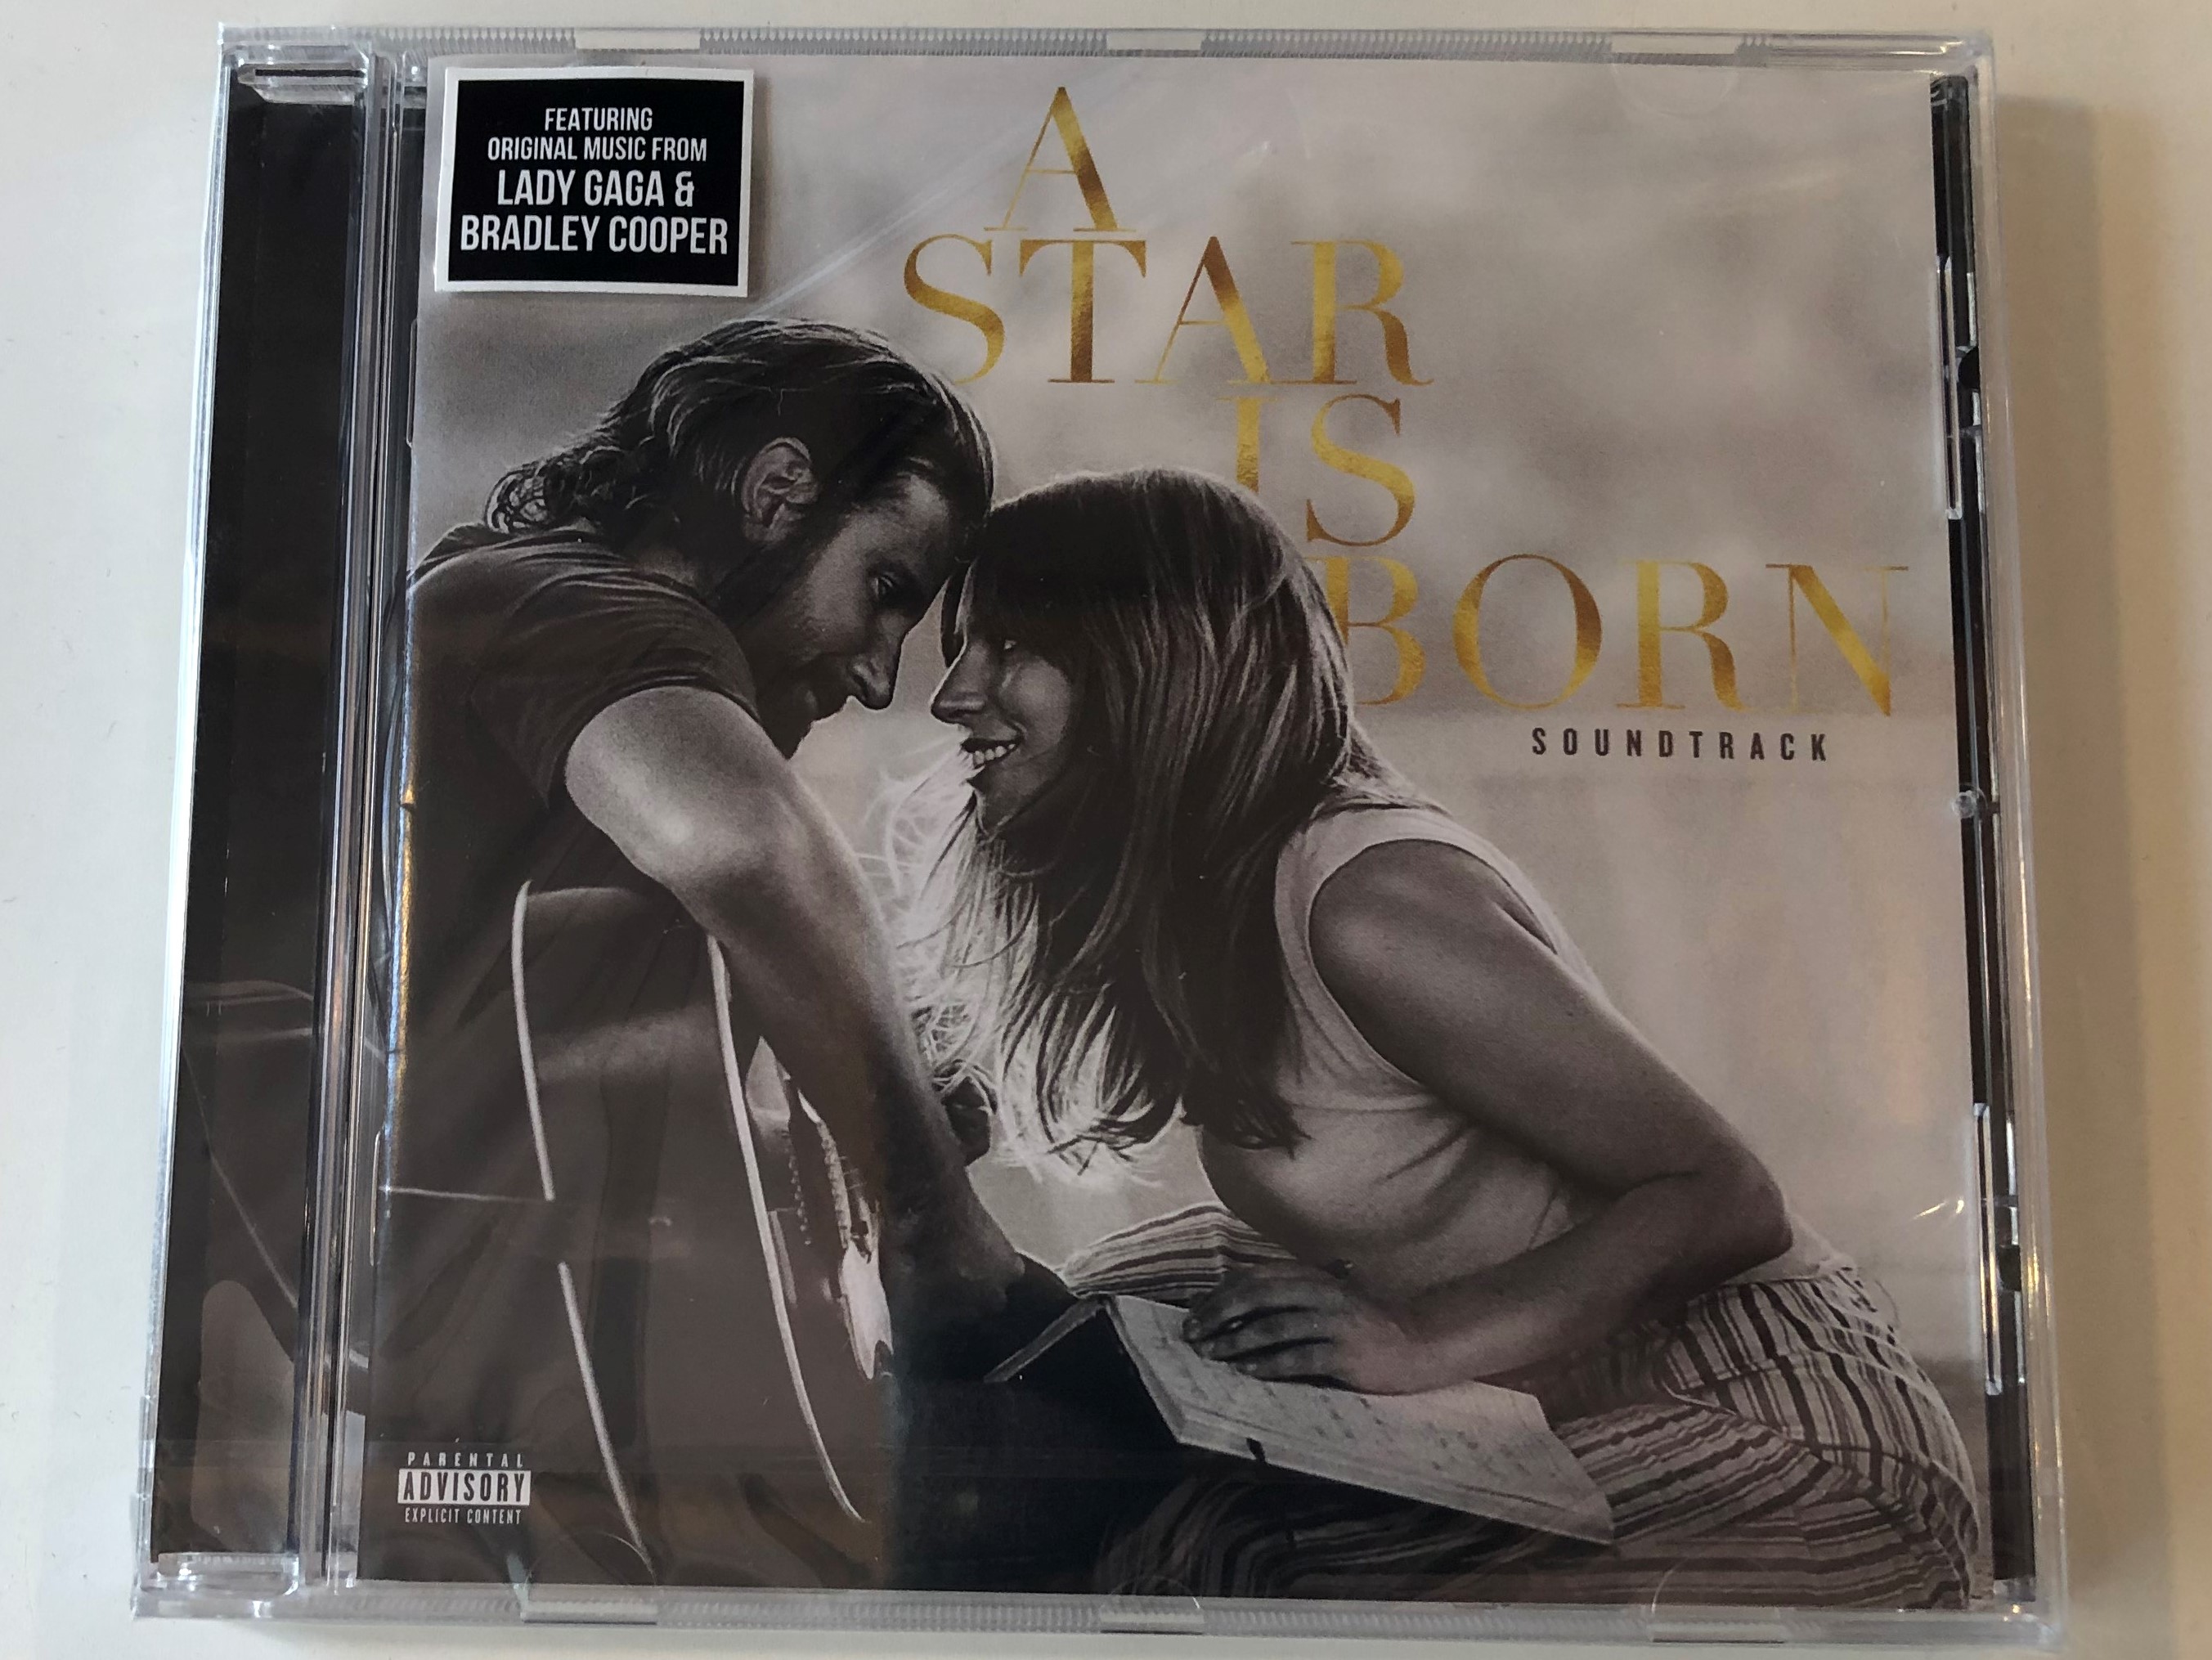 a-star-is-born-soundtrack-featuring-original-music-from-lady-gaga-bradley-cooper-interscope-records-audio-cd-2018-00602567775539-1-.jpg